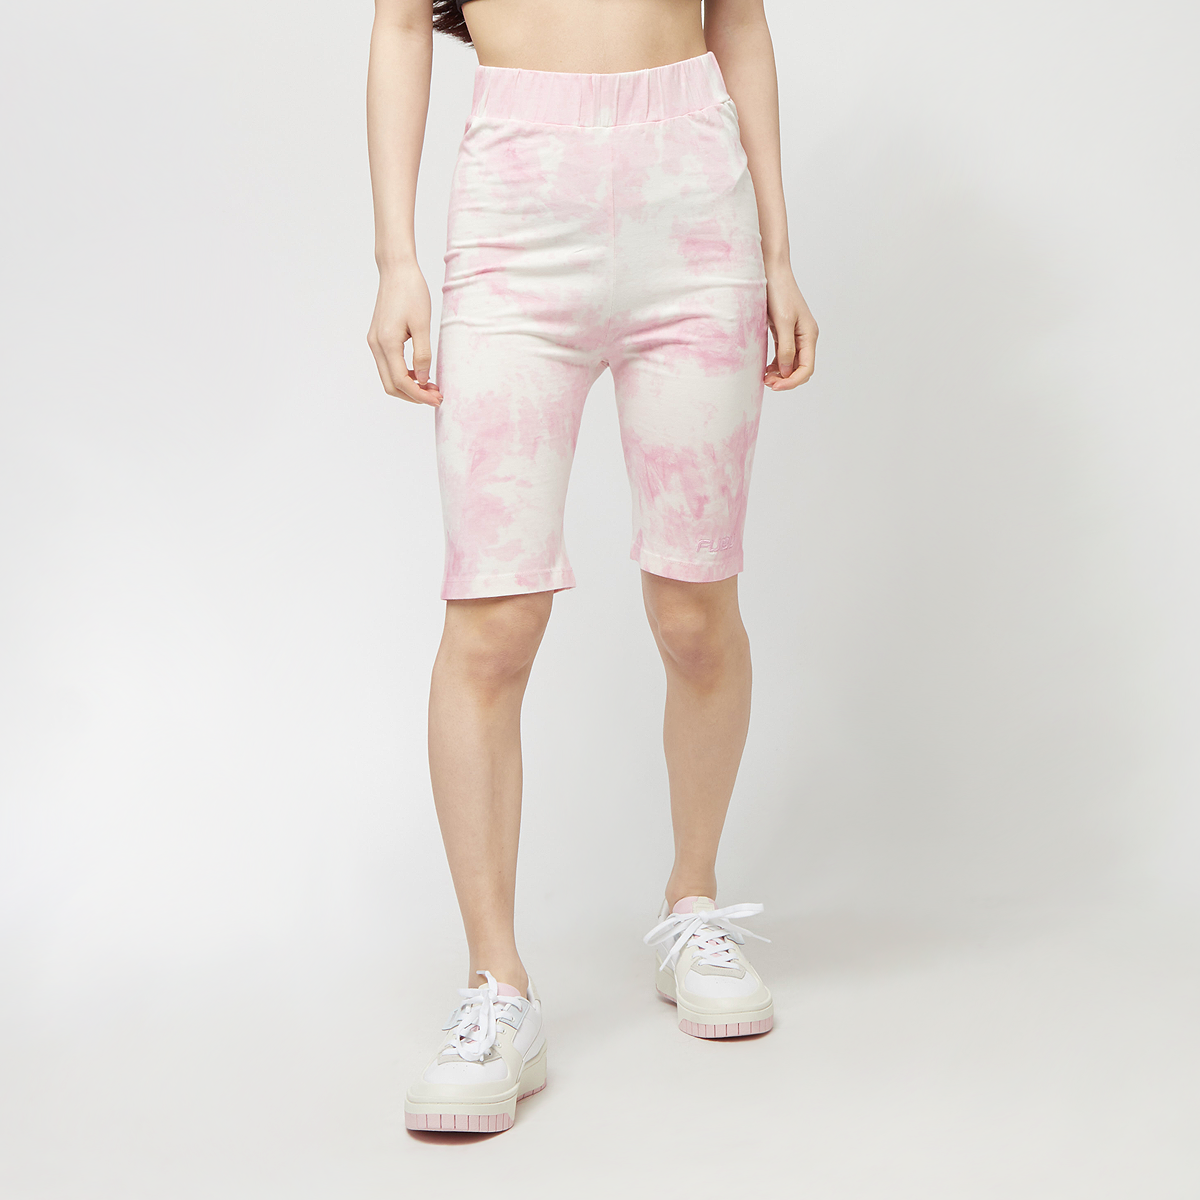 Productafbeelding: Corporate Tiedye Cycling Shorts